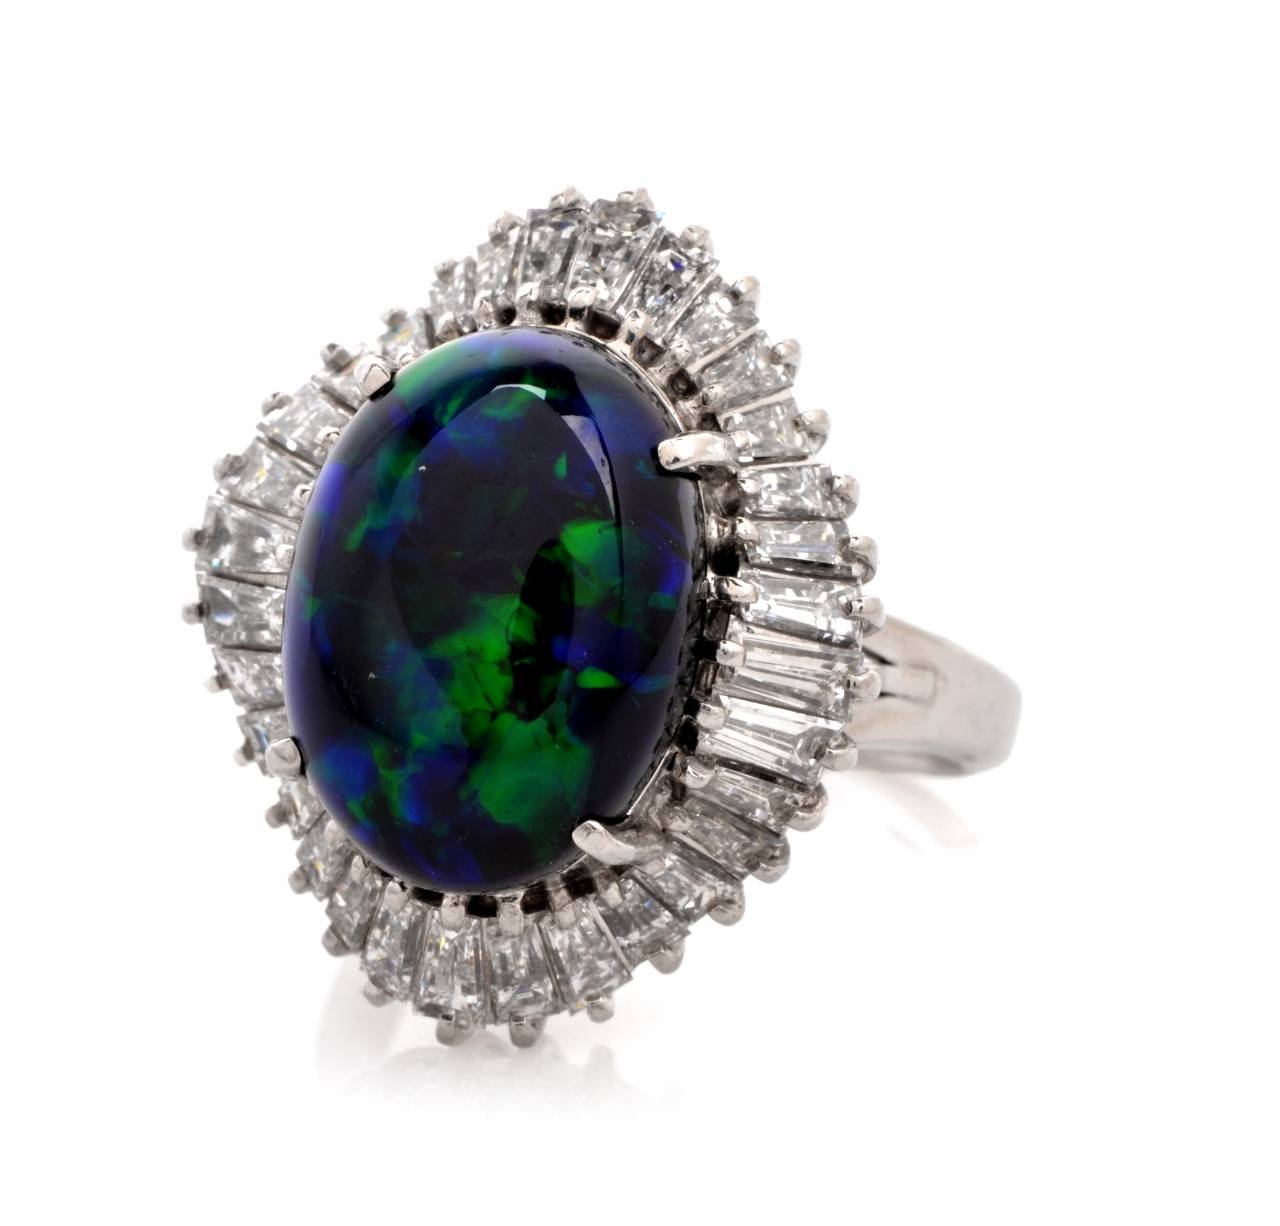 This captivating ballerina cocktail ring with a breathtaking black opal cabochon of rare color combination and baguette diamonds is crafted in solid platinum  and  weighs approximately 13.3 grams.  Incorporating an aesthetically enchanting ovular